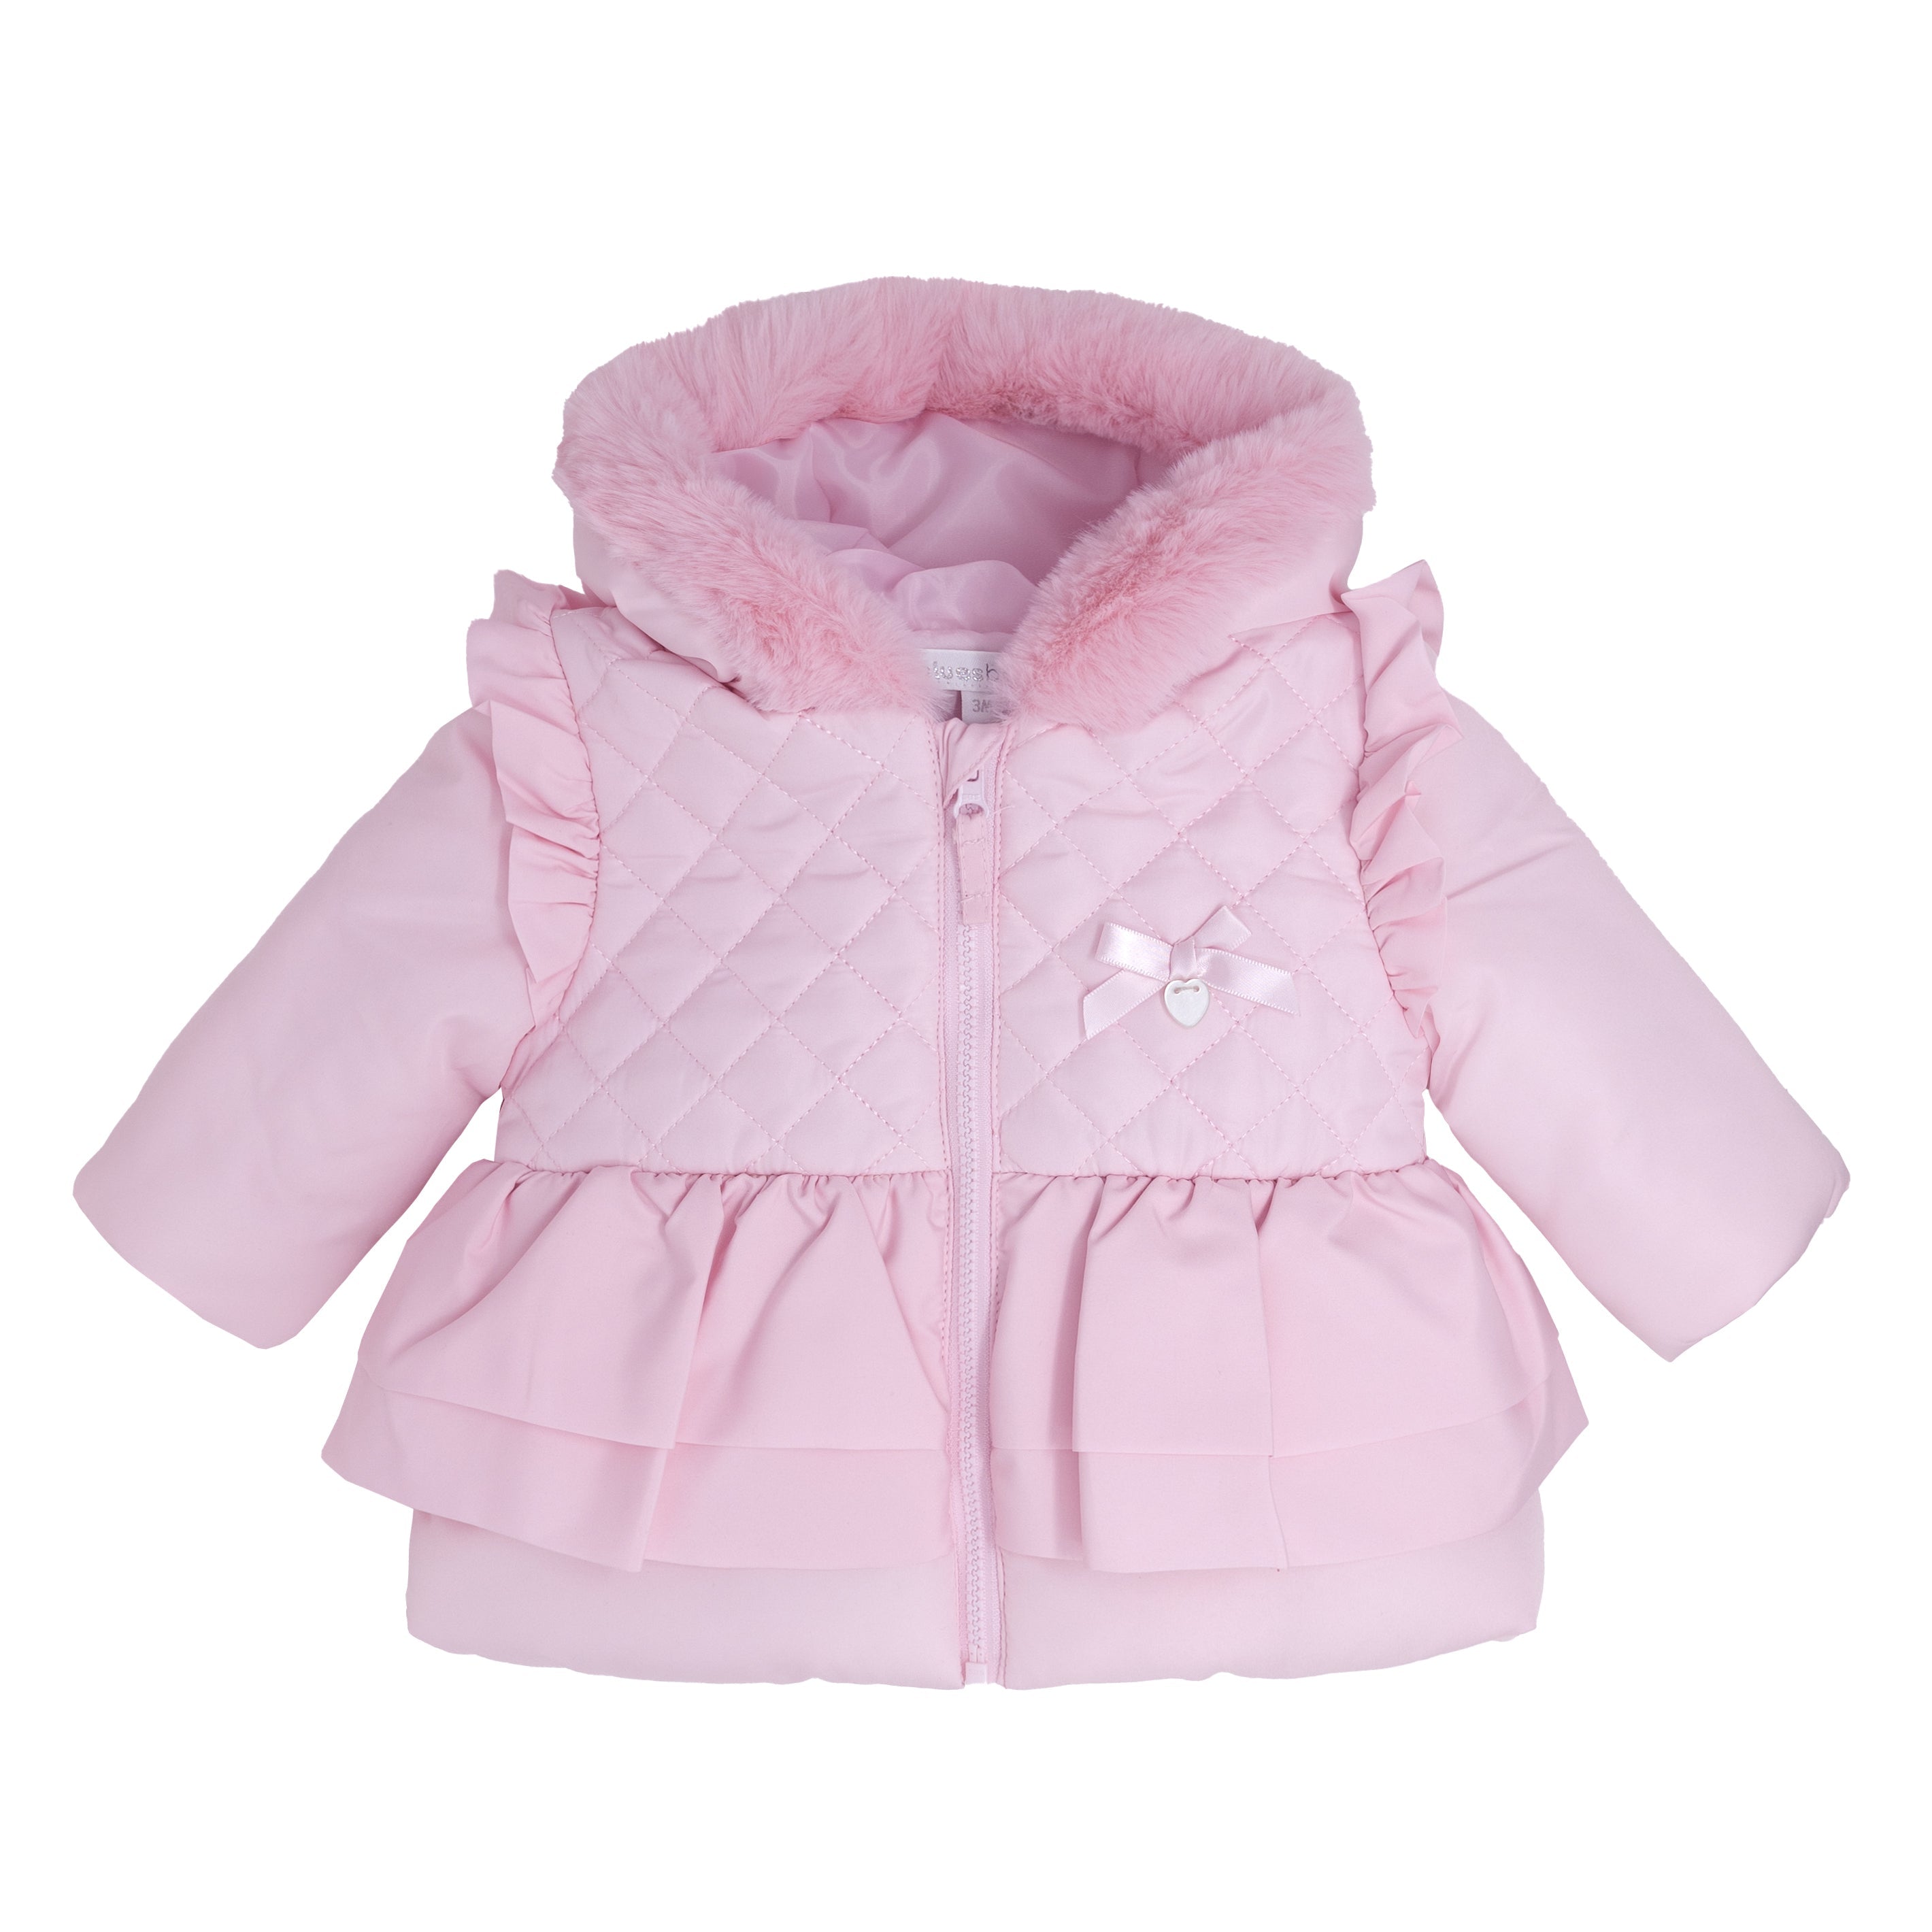 Girls quilted jacket with frill peplum and faux fur hood